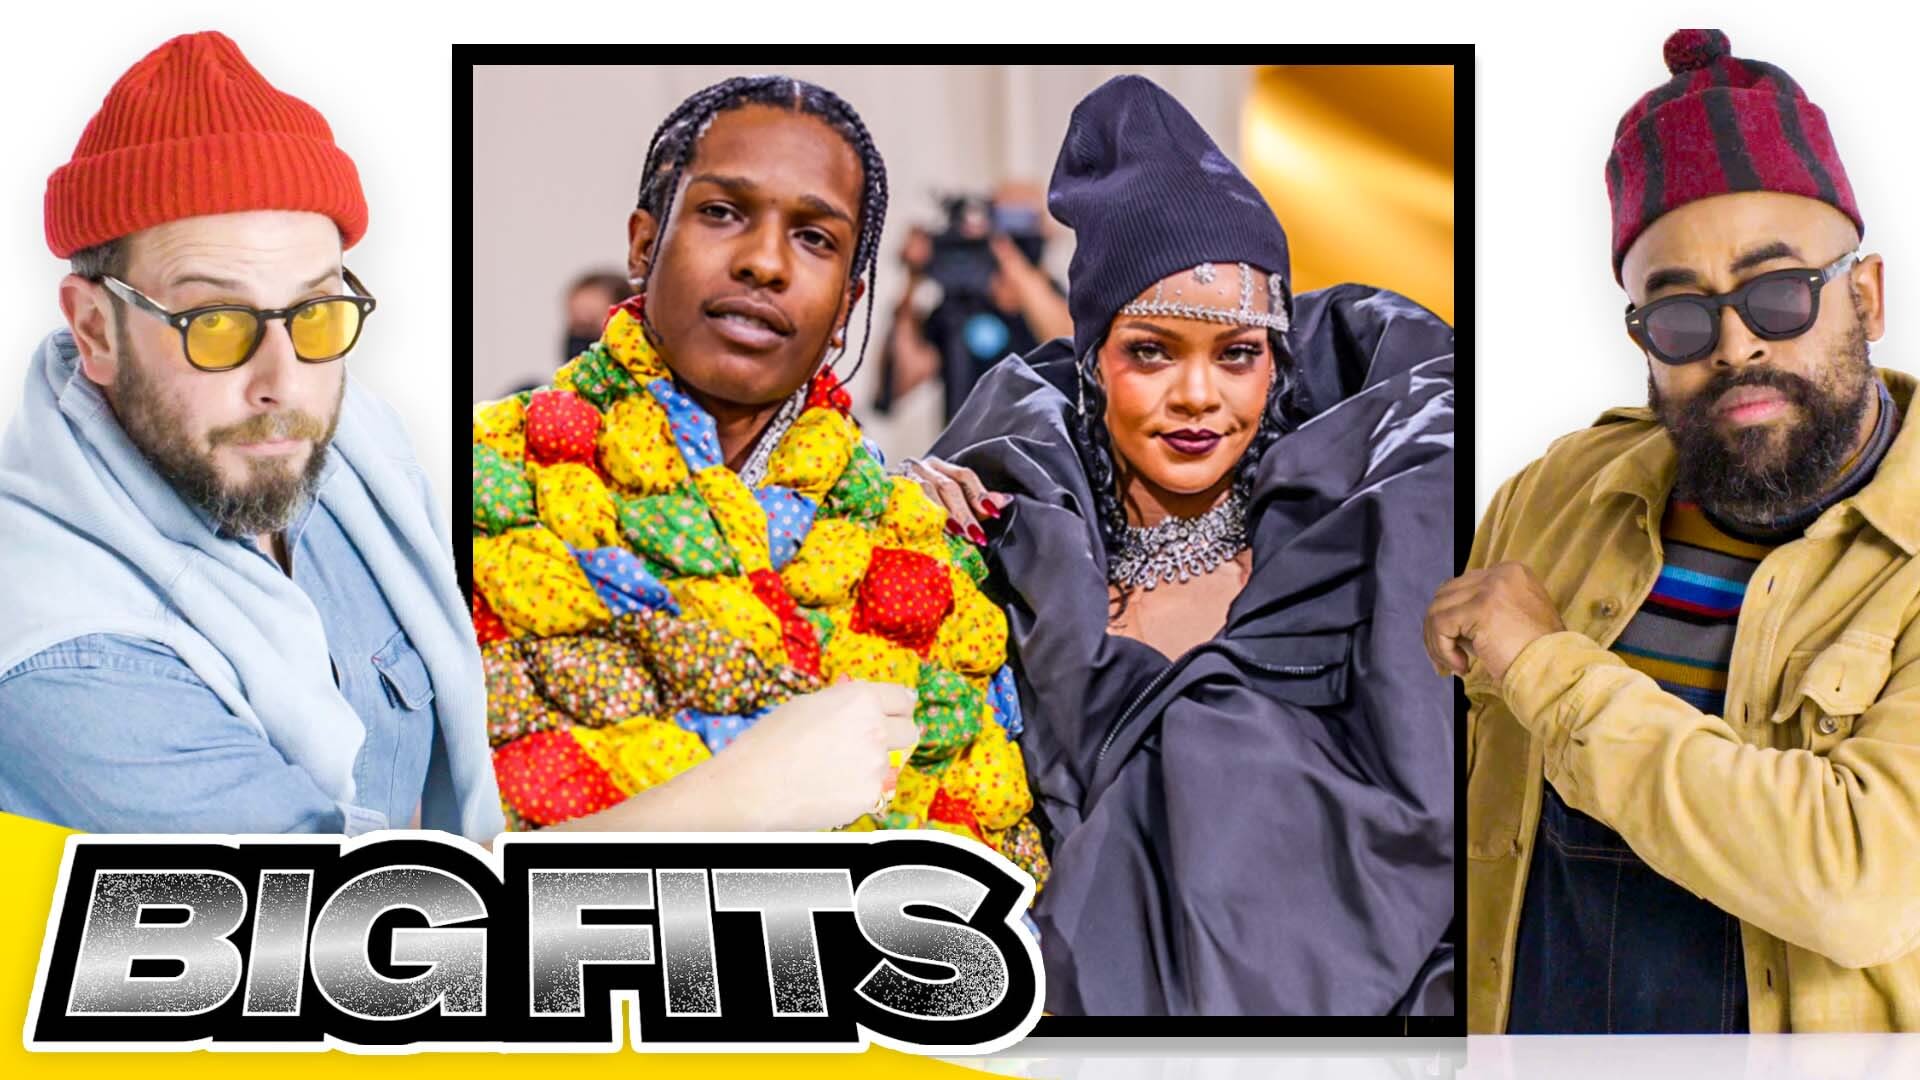 Watch Rihanna & A$AP Rocky's 5 Best Couples Fits: Ranked BIG to BIGGEST, Big Fits